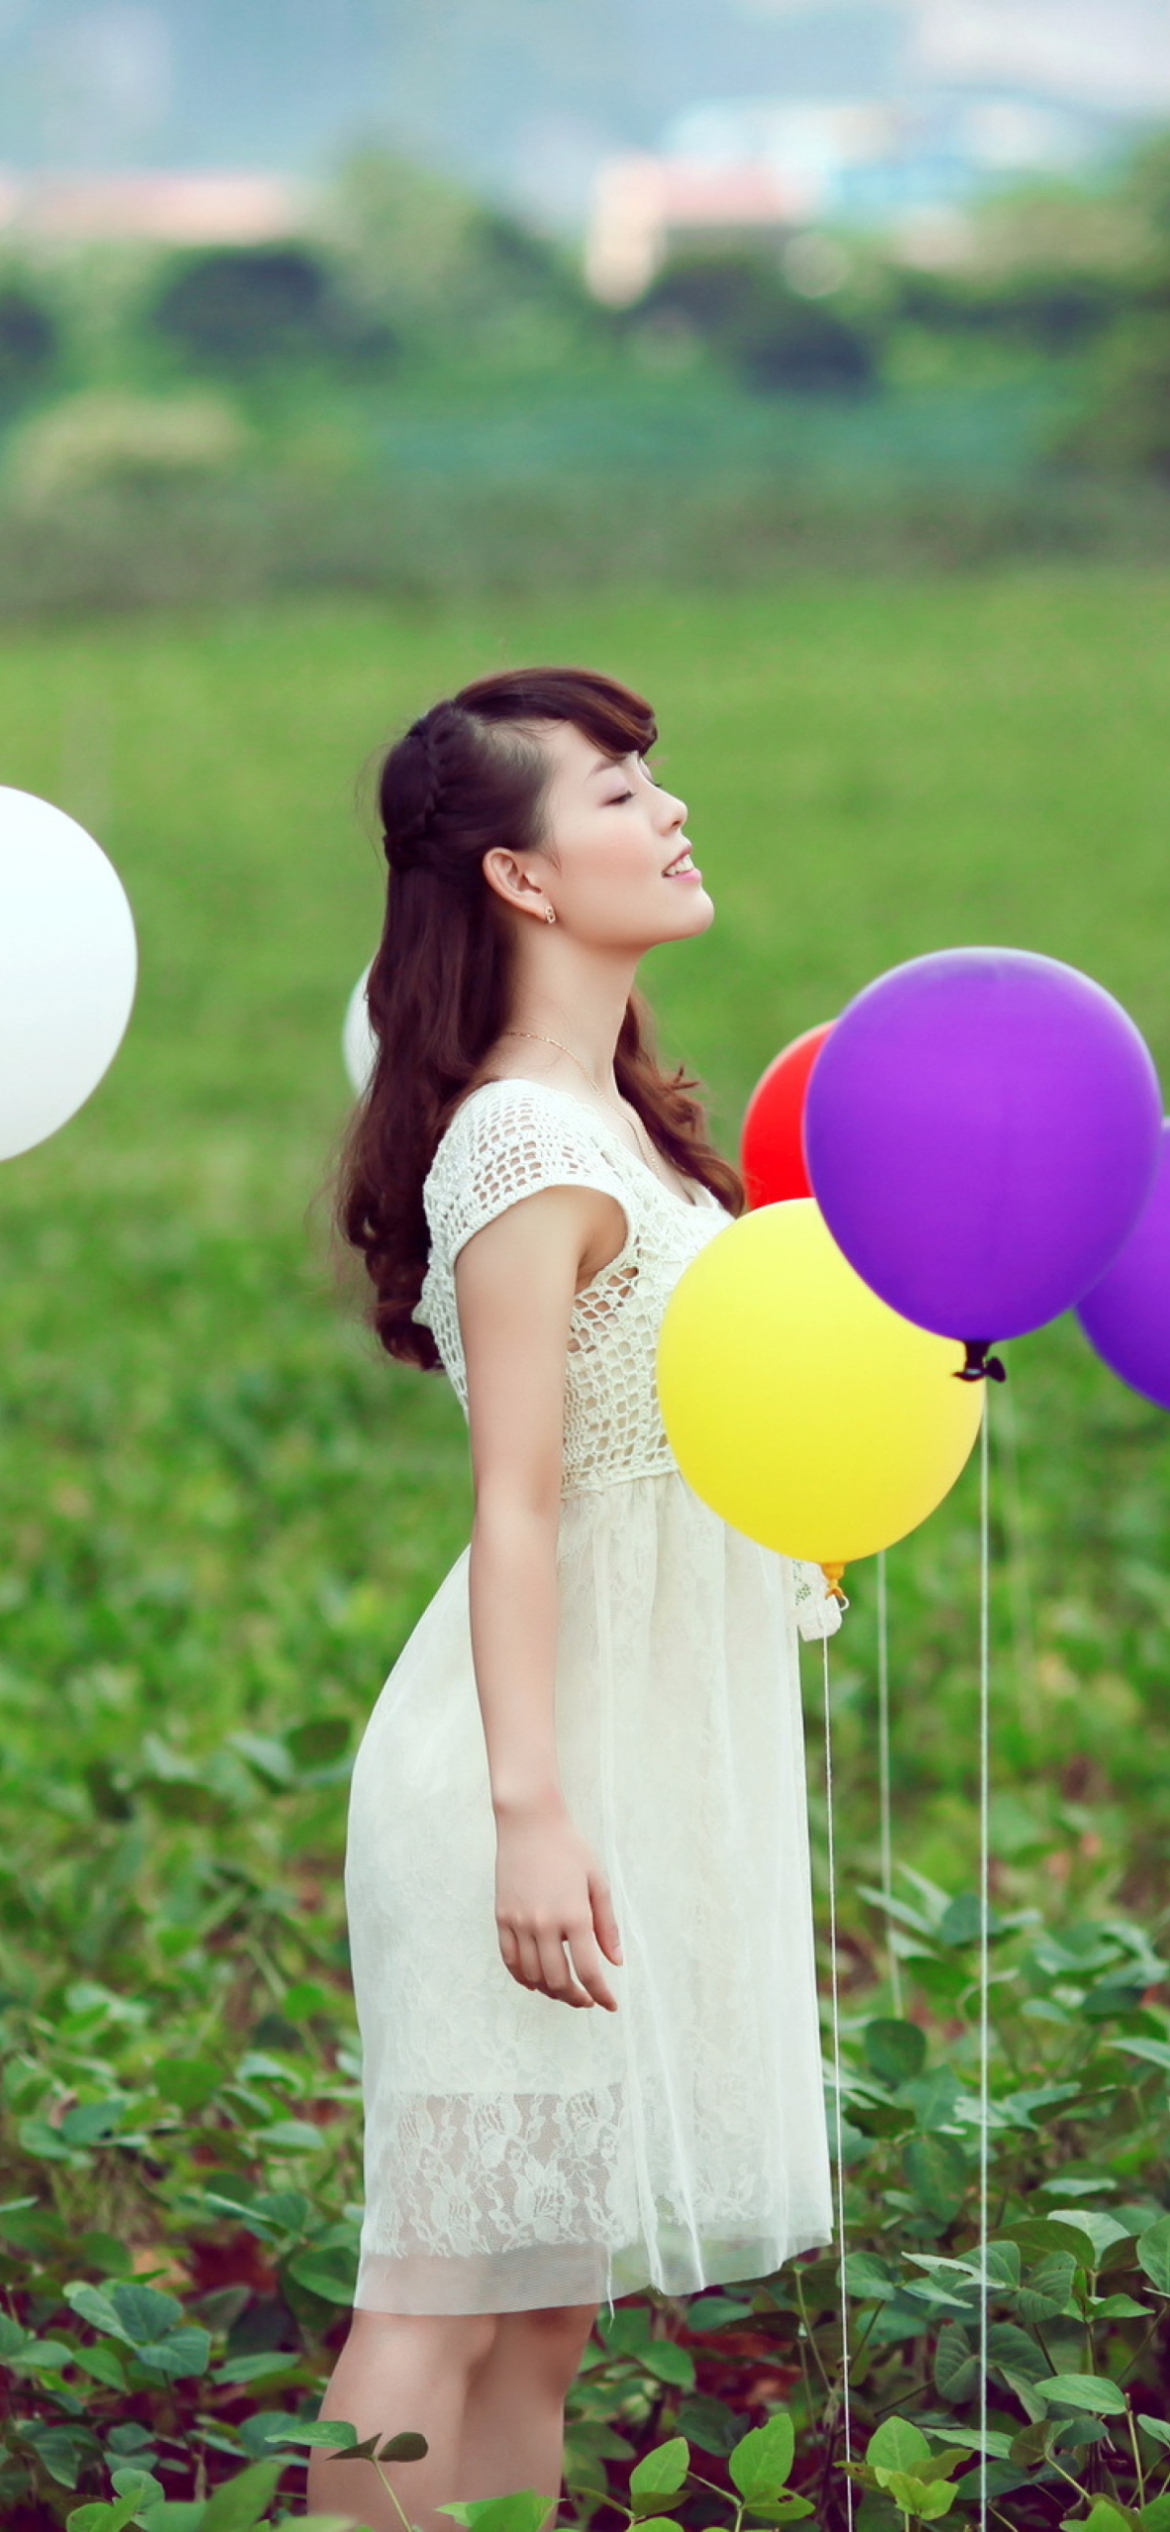 Girl And Colorful Balloons wallpaper 1170x2532